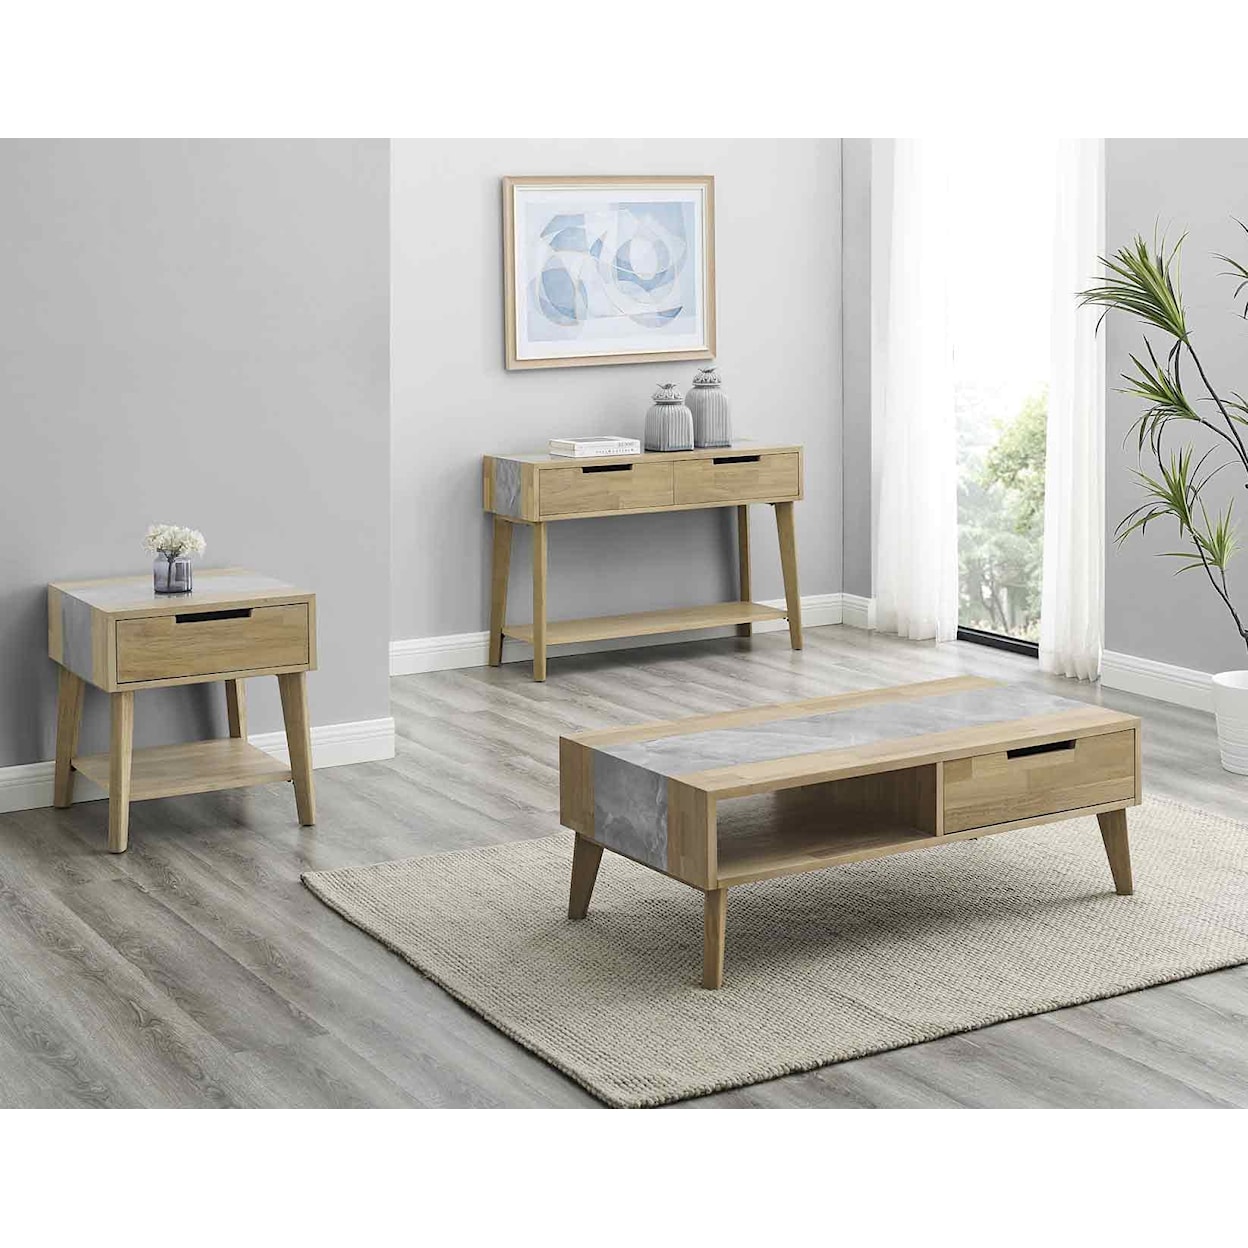 Steve Silver Calgary End Table with Storage